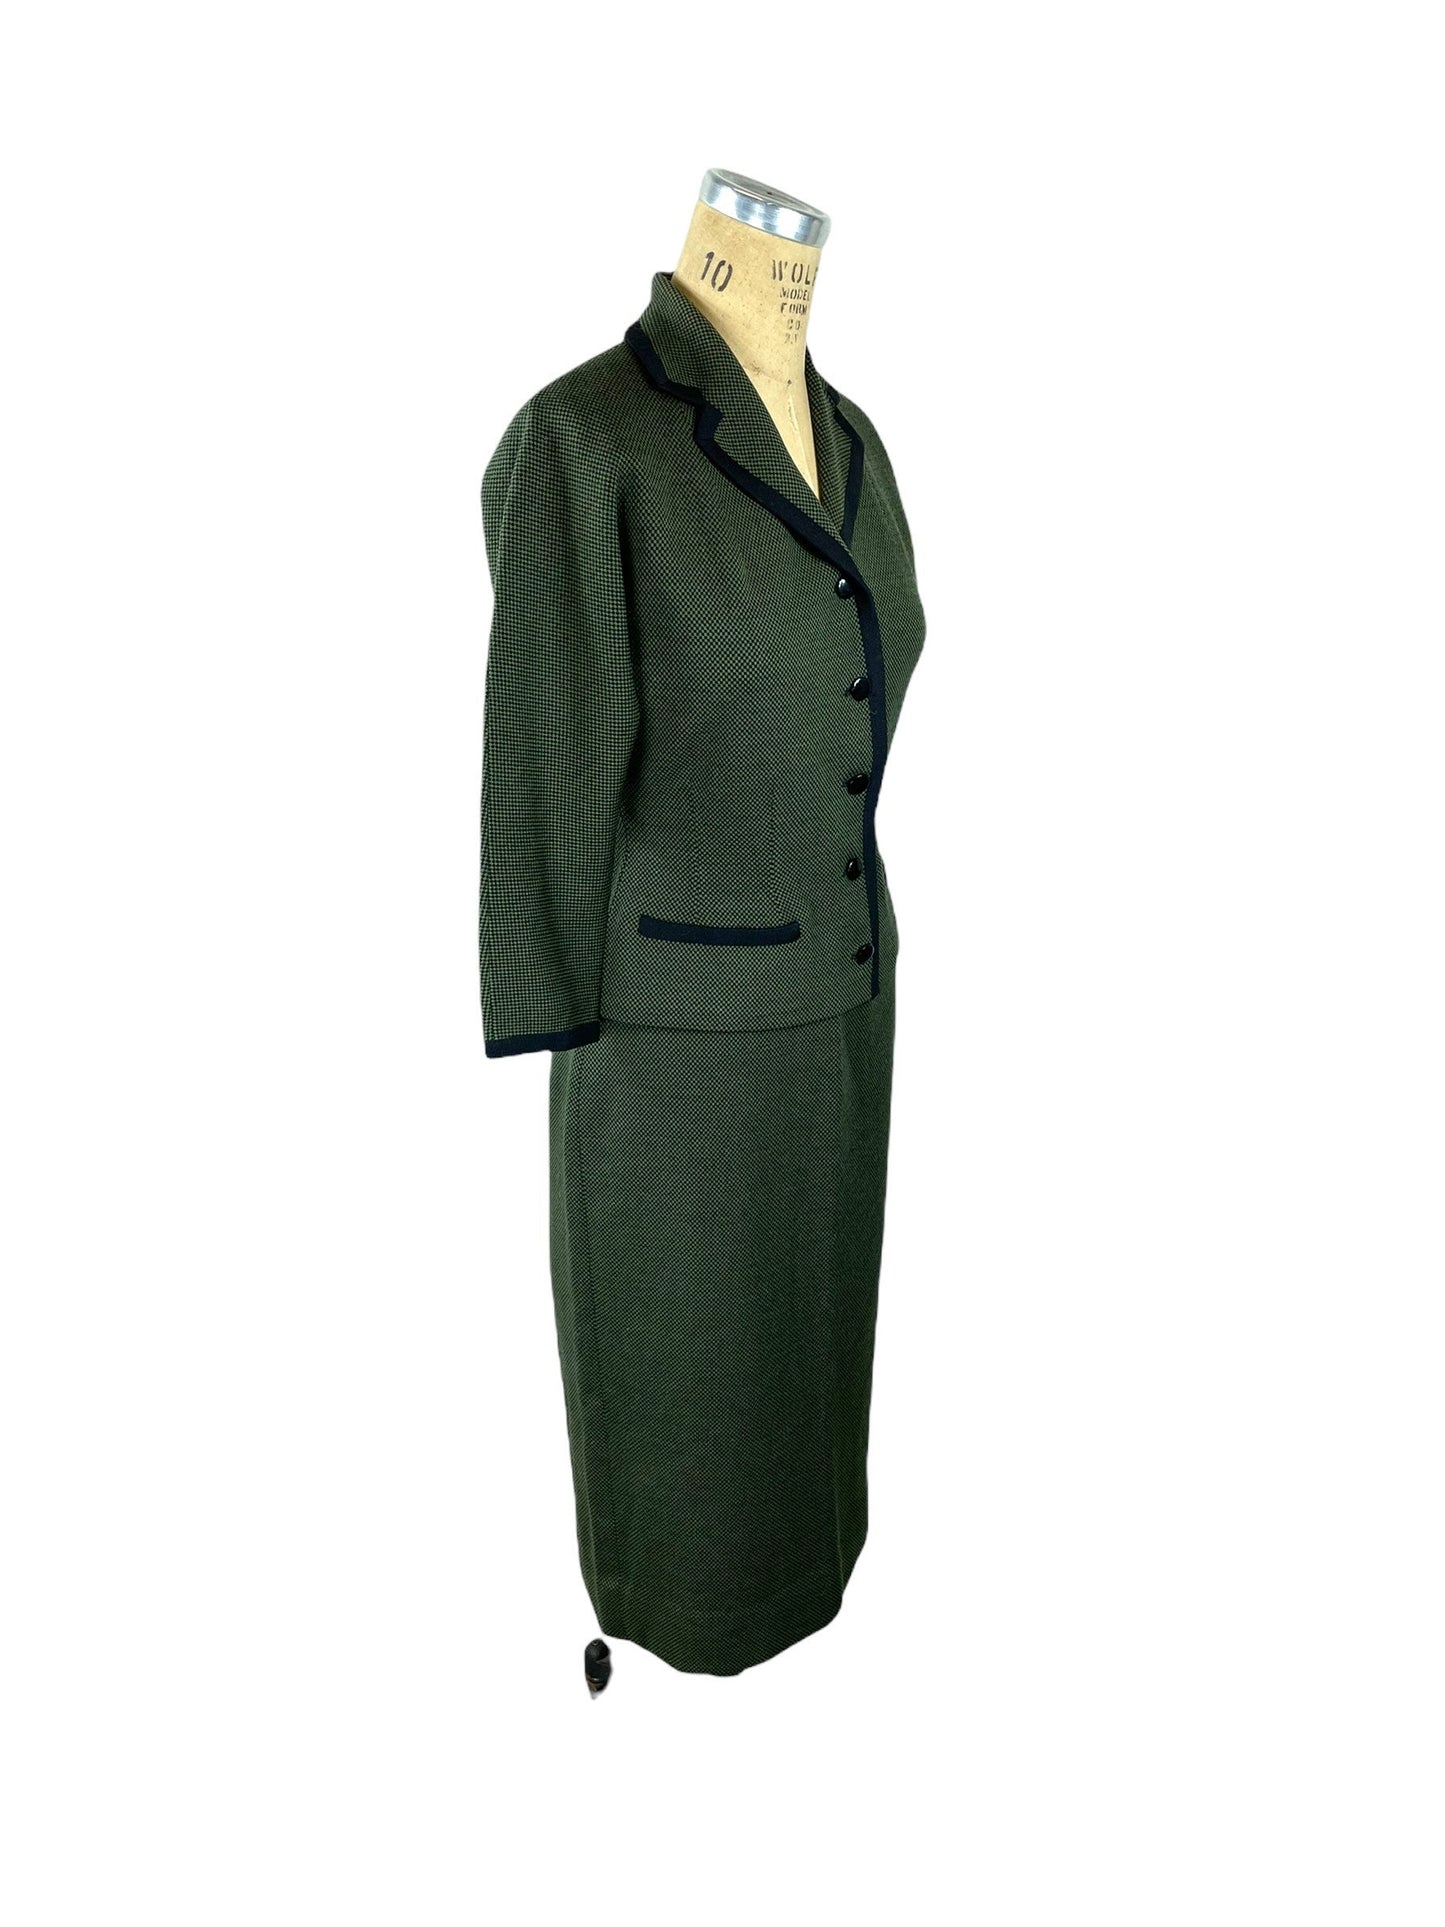 1950s wool suit green black checked Made in France Size S